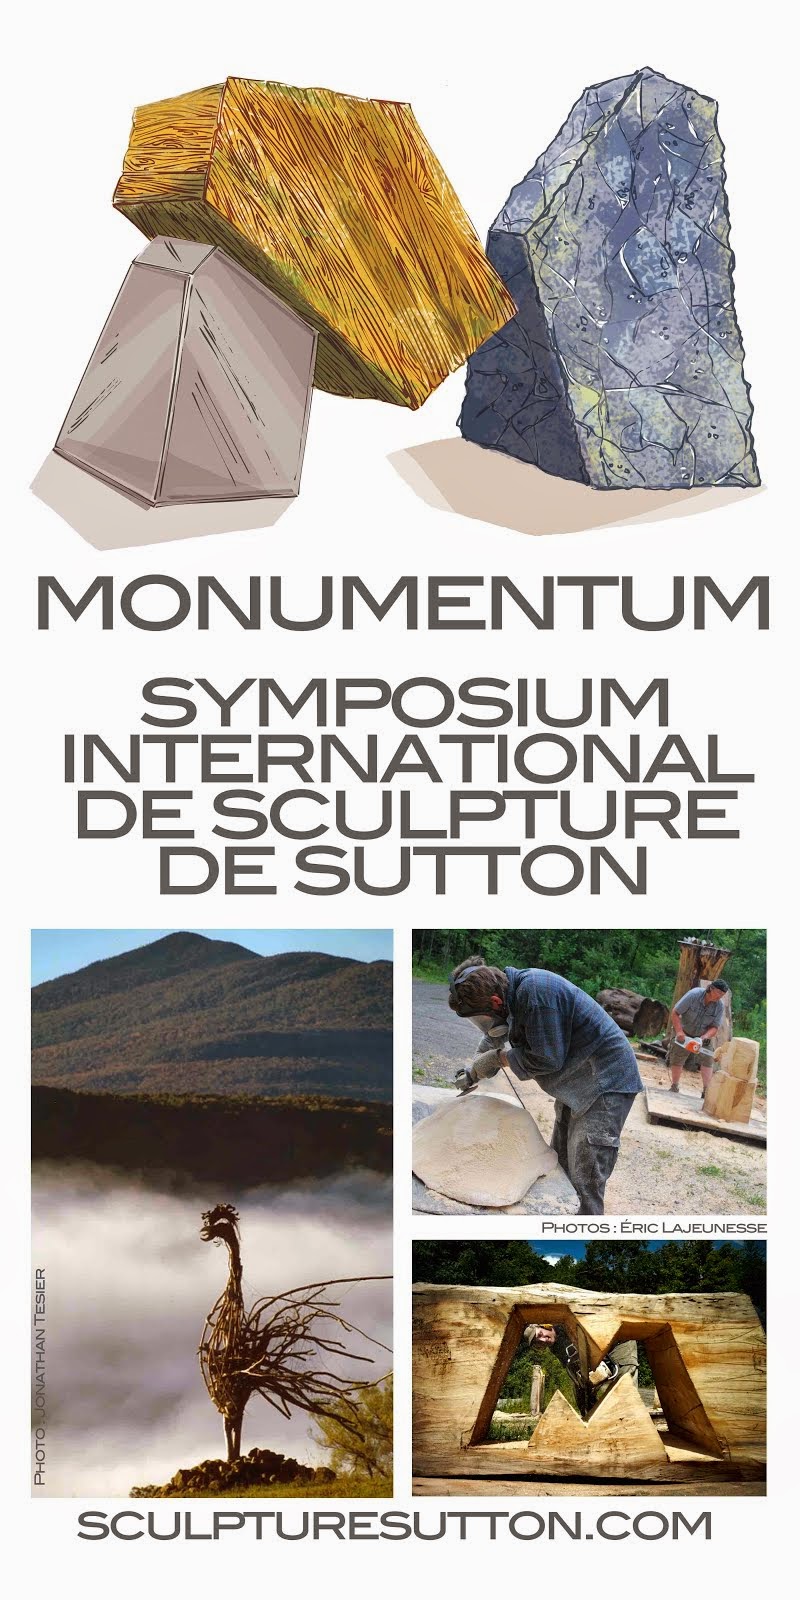 The International Sculpture Symposium will take place August 7th to 16th, 2015, in Sutton, Québec. AfficheMonumentum3pix6pi